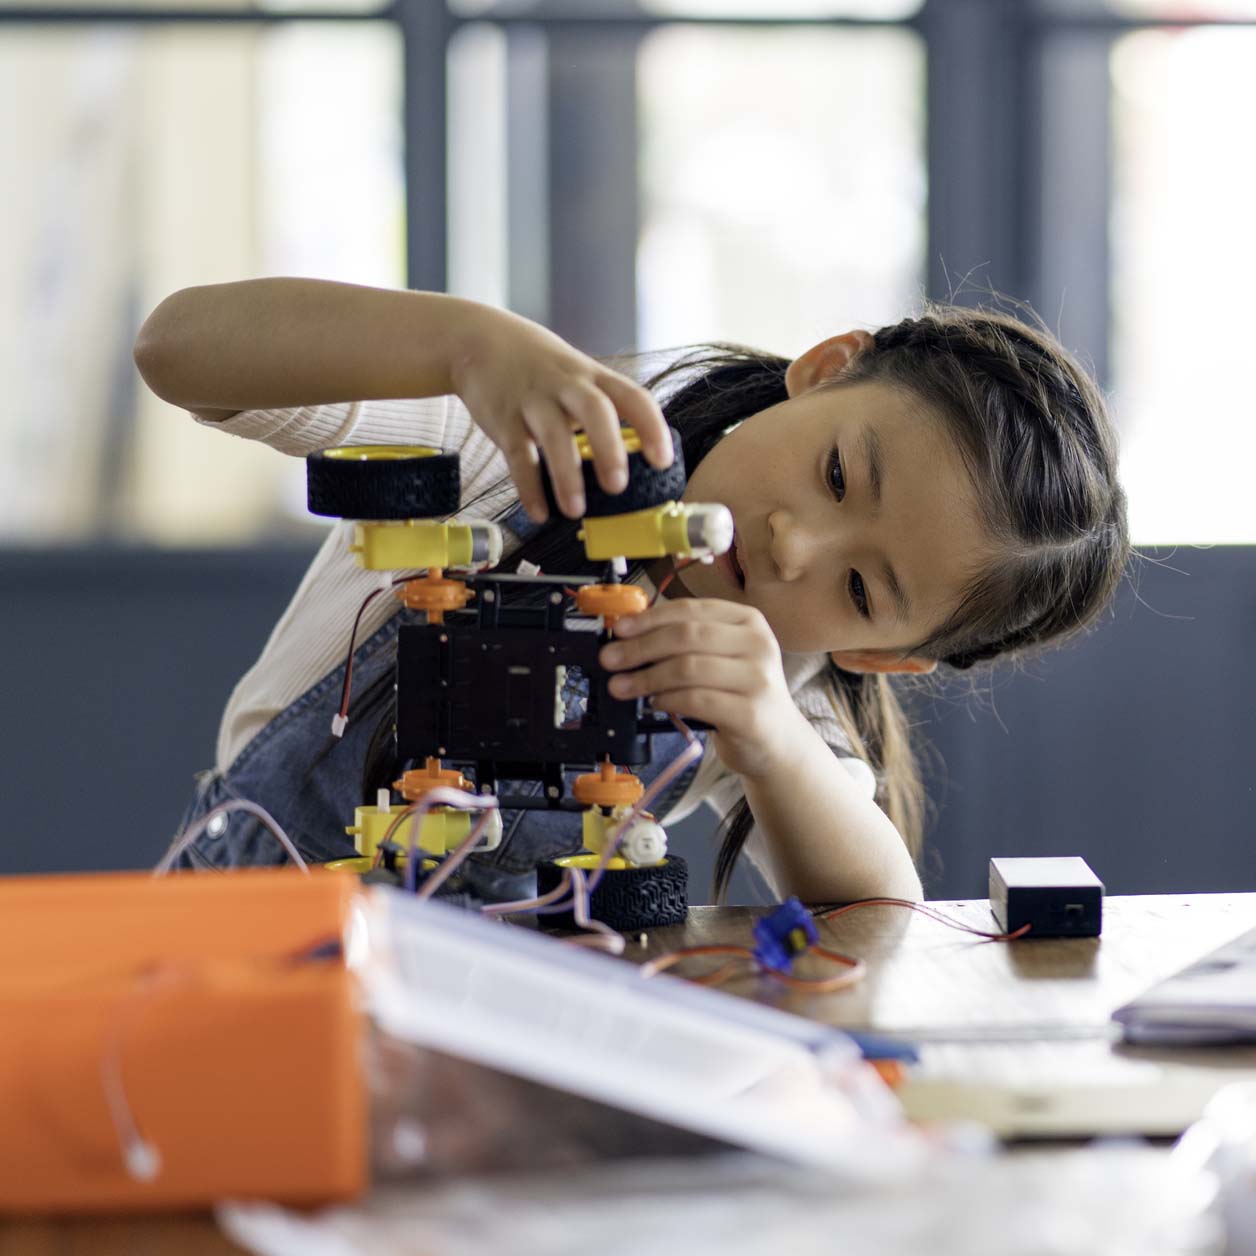 Learn why STEAM Learning is so valuable by, Prescolaire Early Learning Academy.